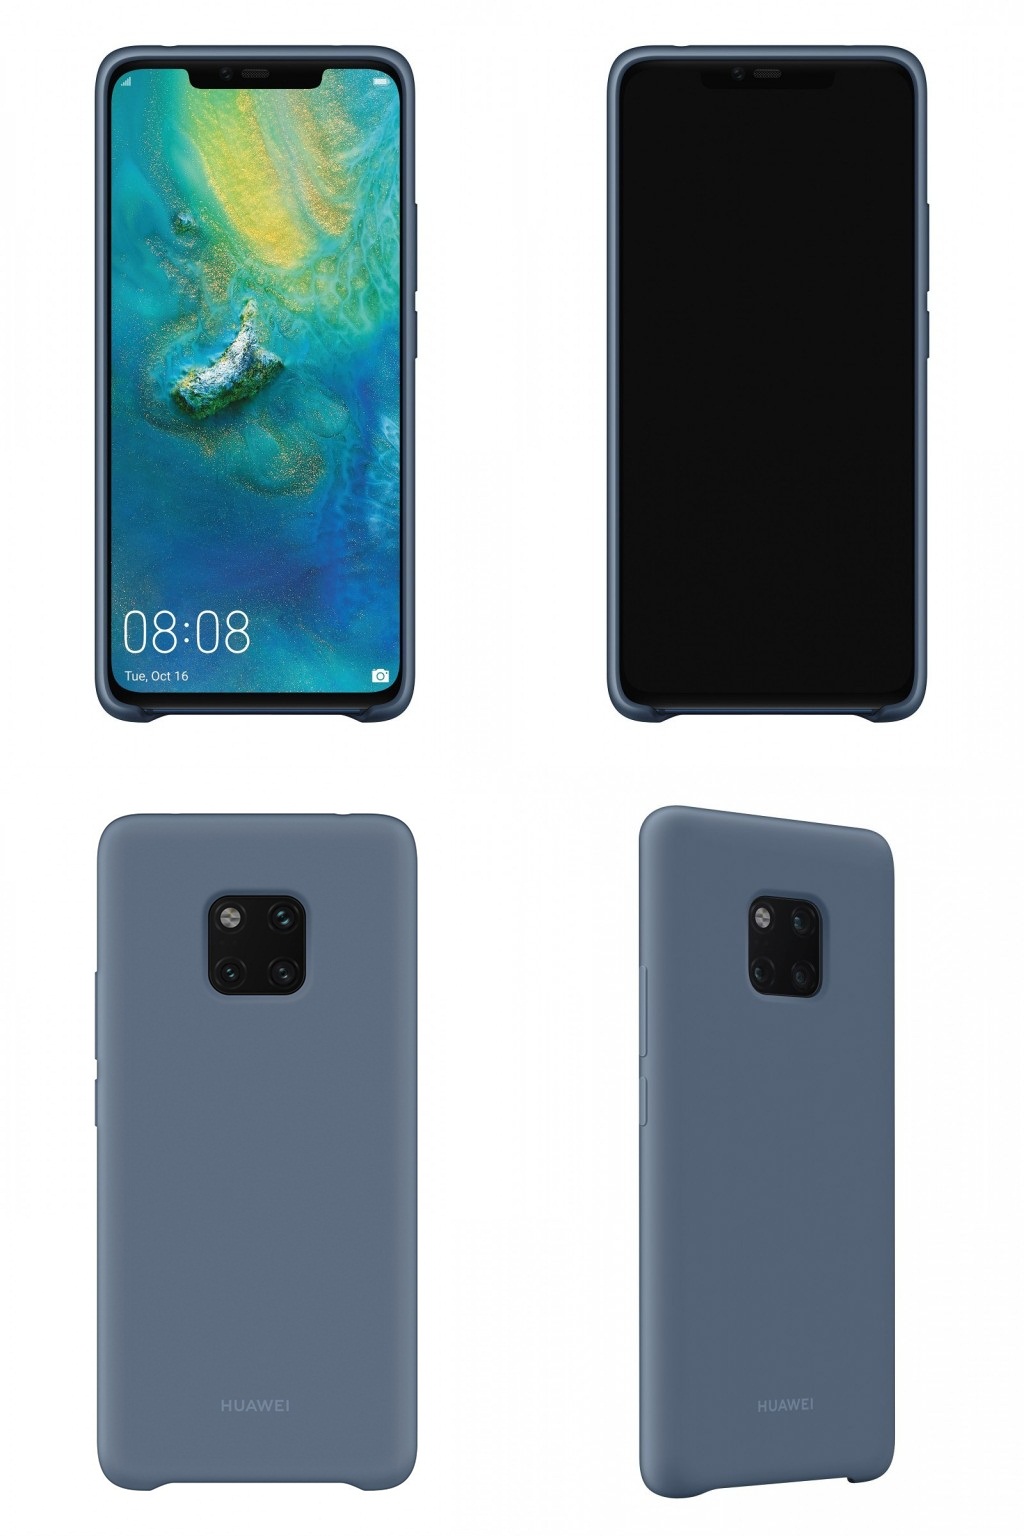 Huawei Mate 20 Pro Renders Leak in High Quality with Cases